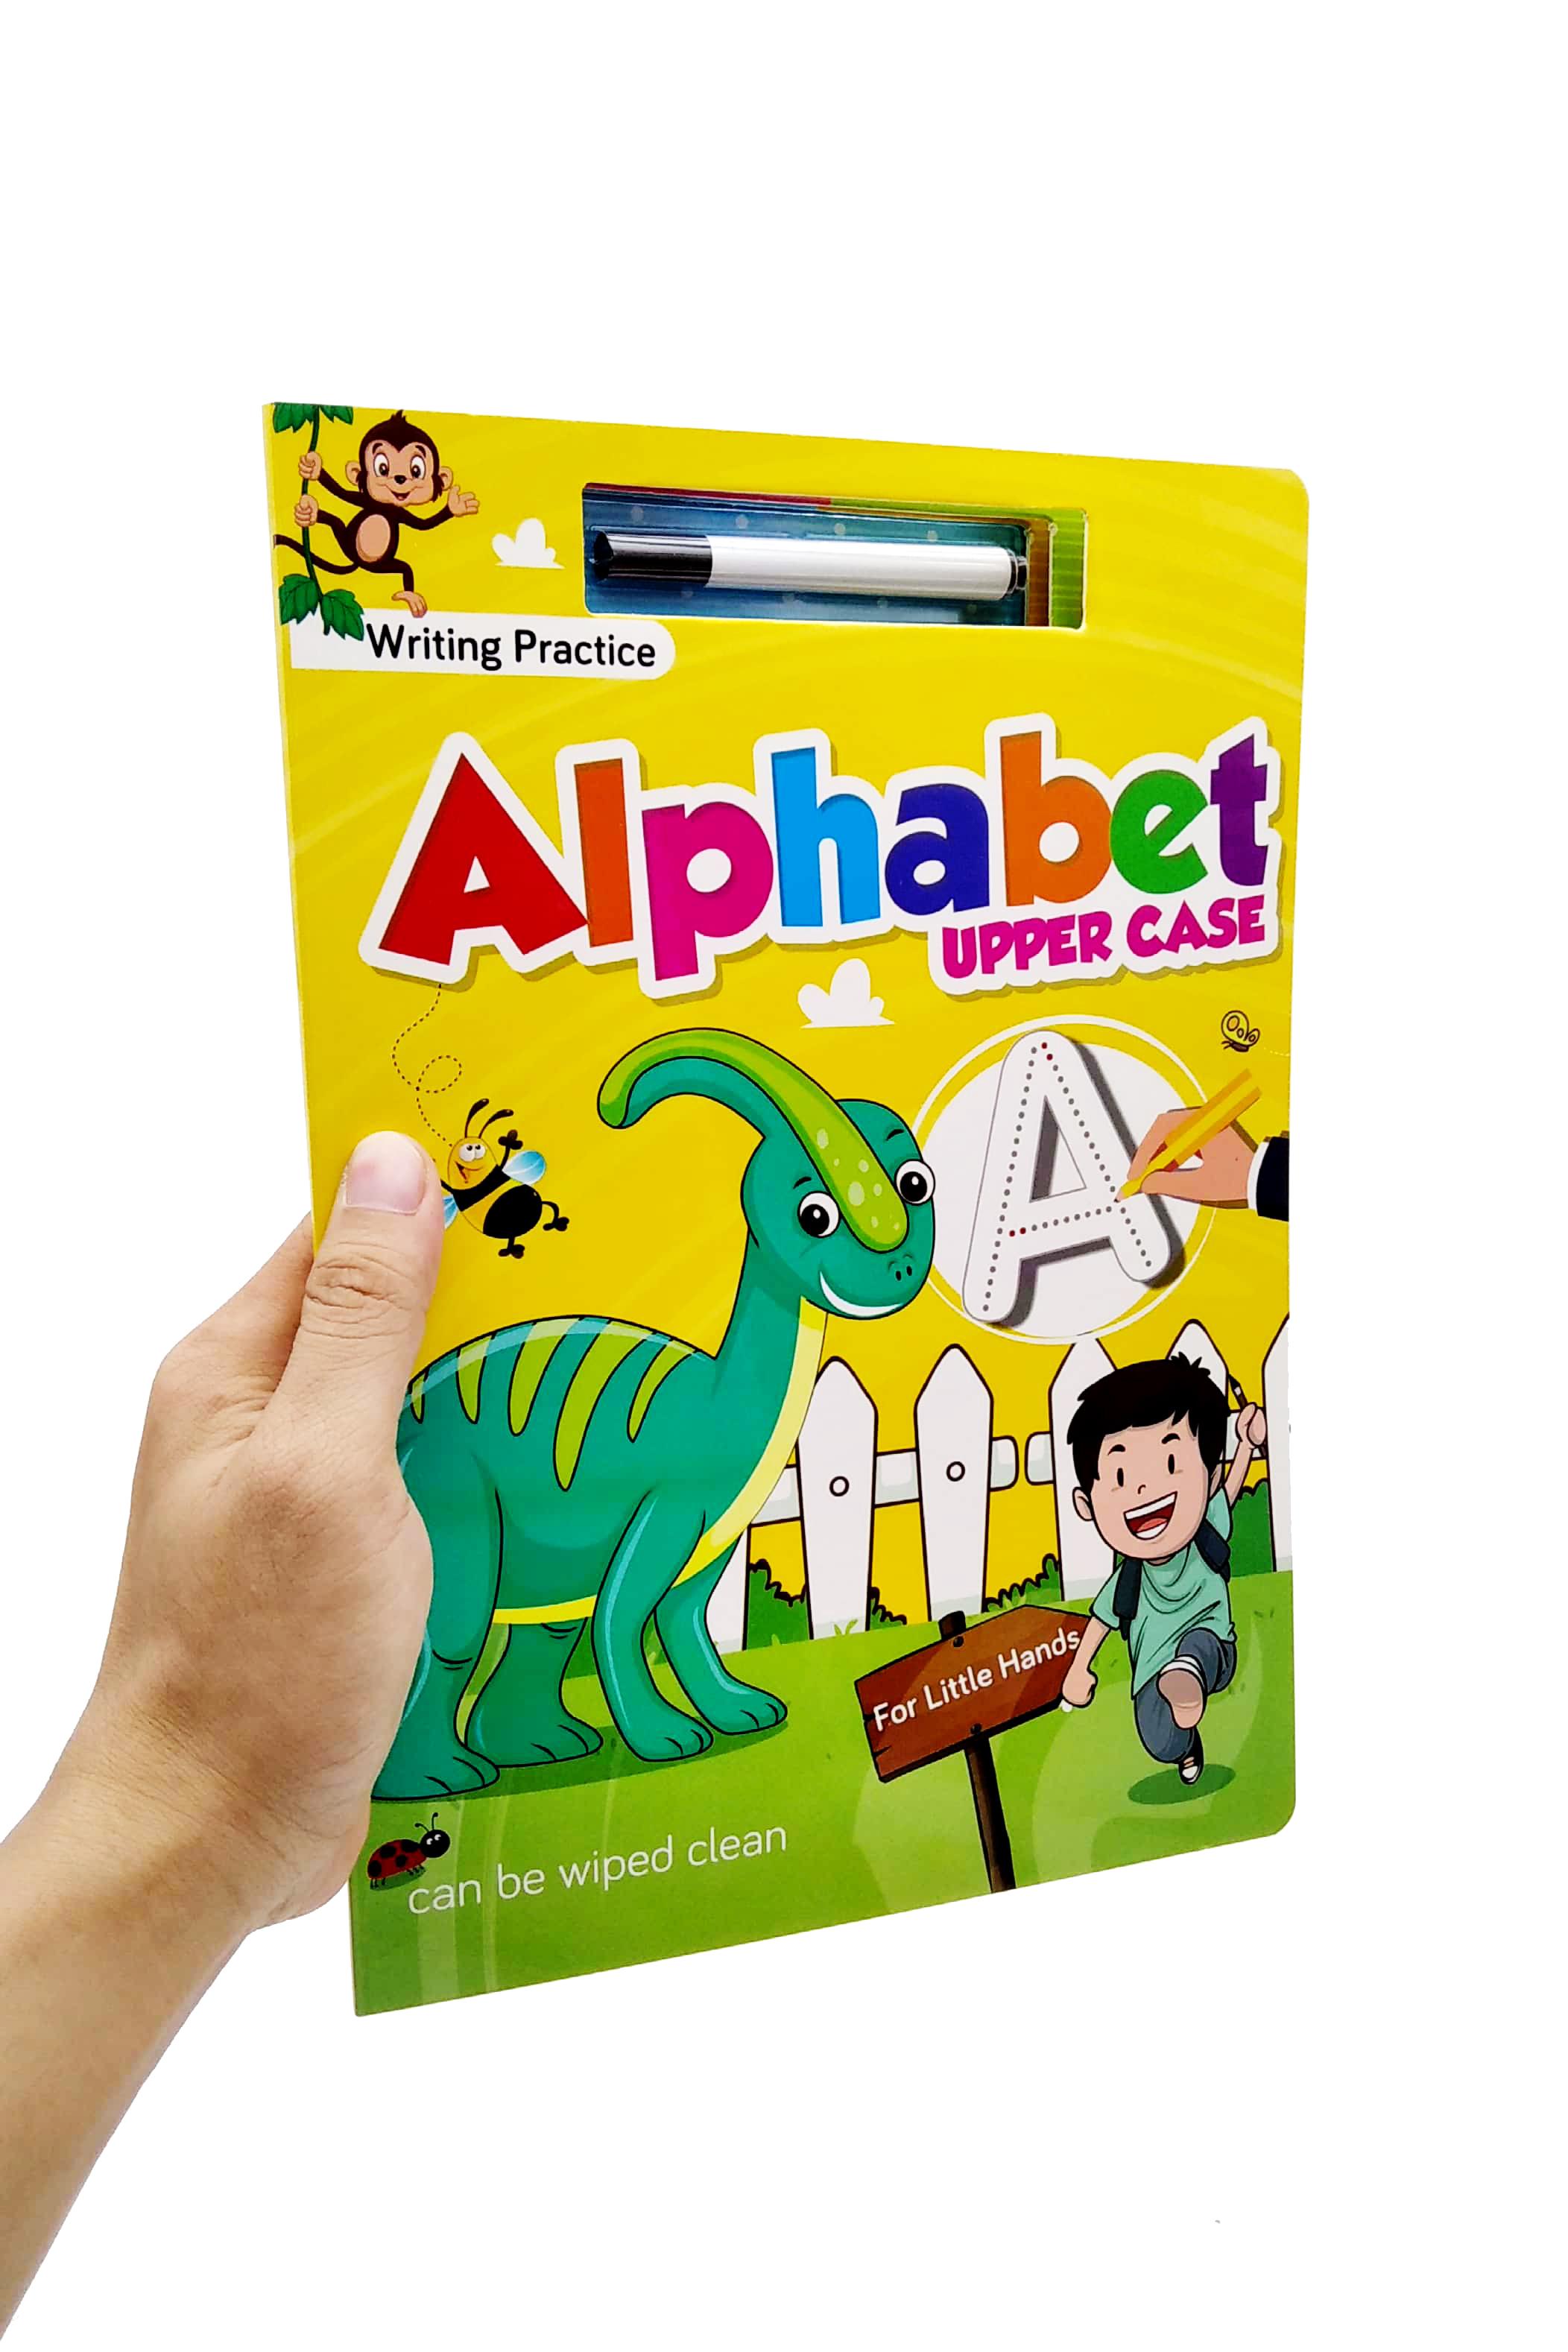 Writing Practices For Little Hands: Alphabet Upper Case